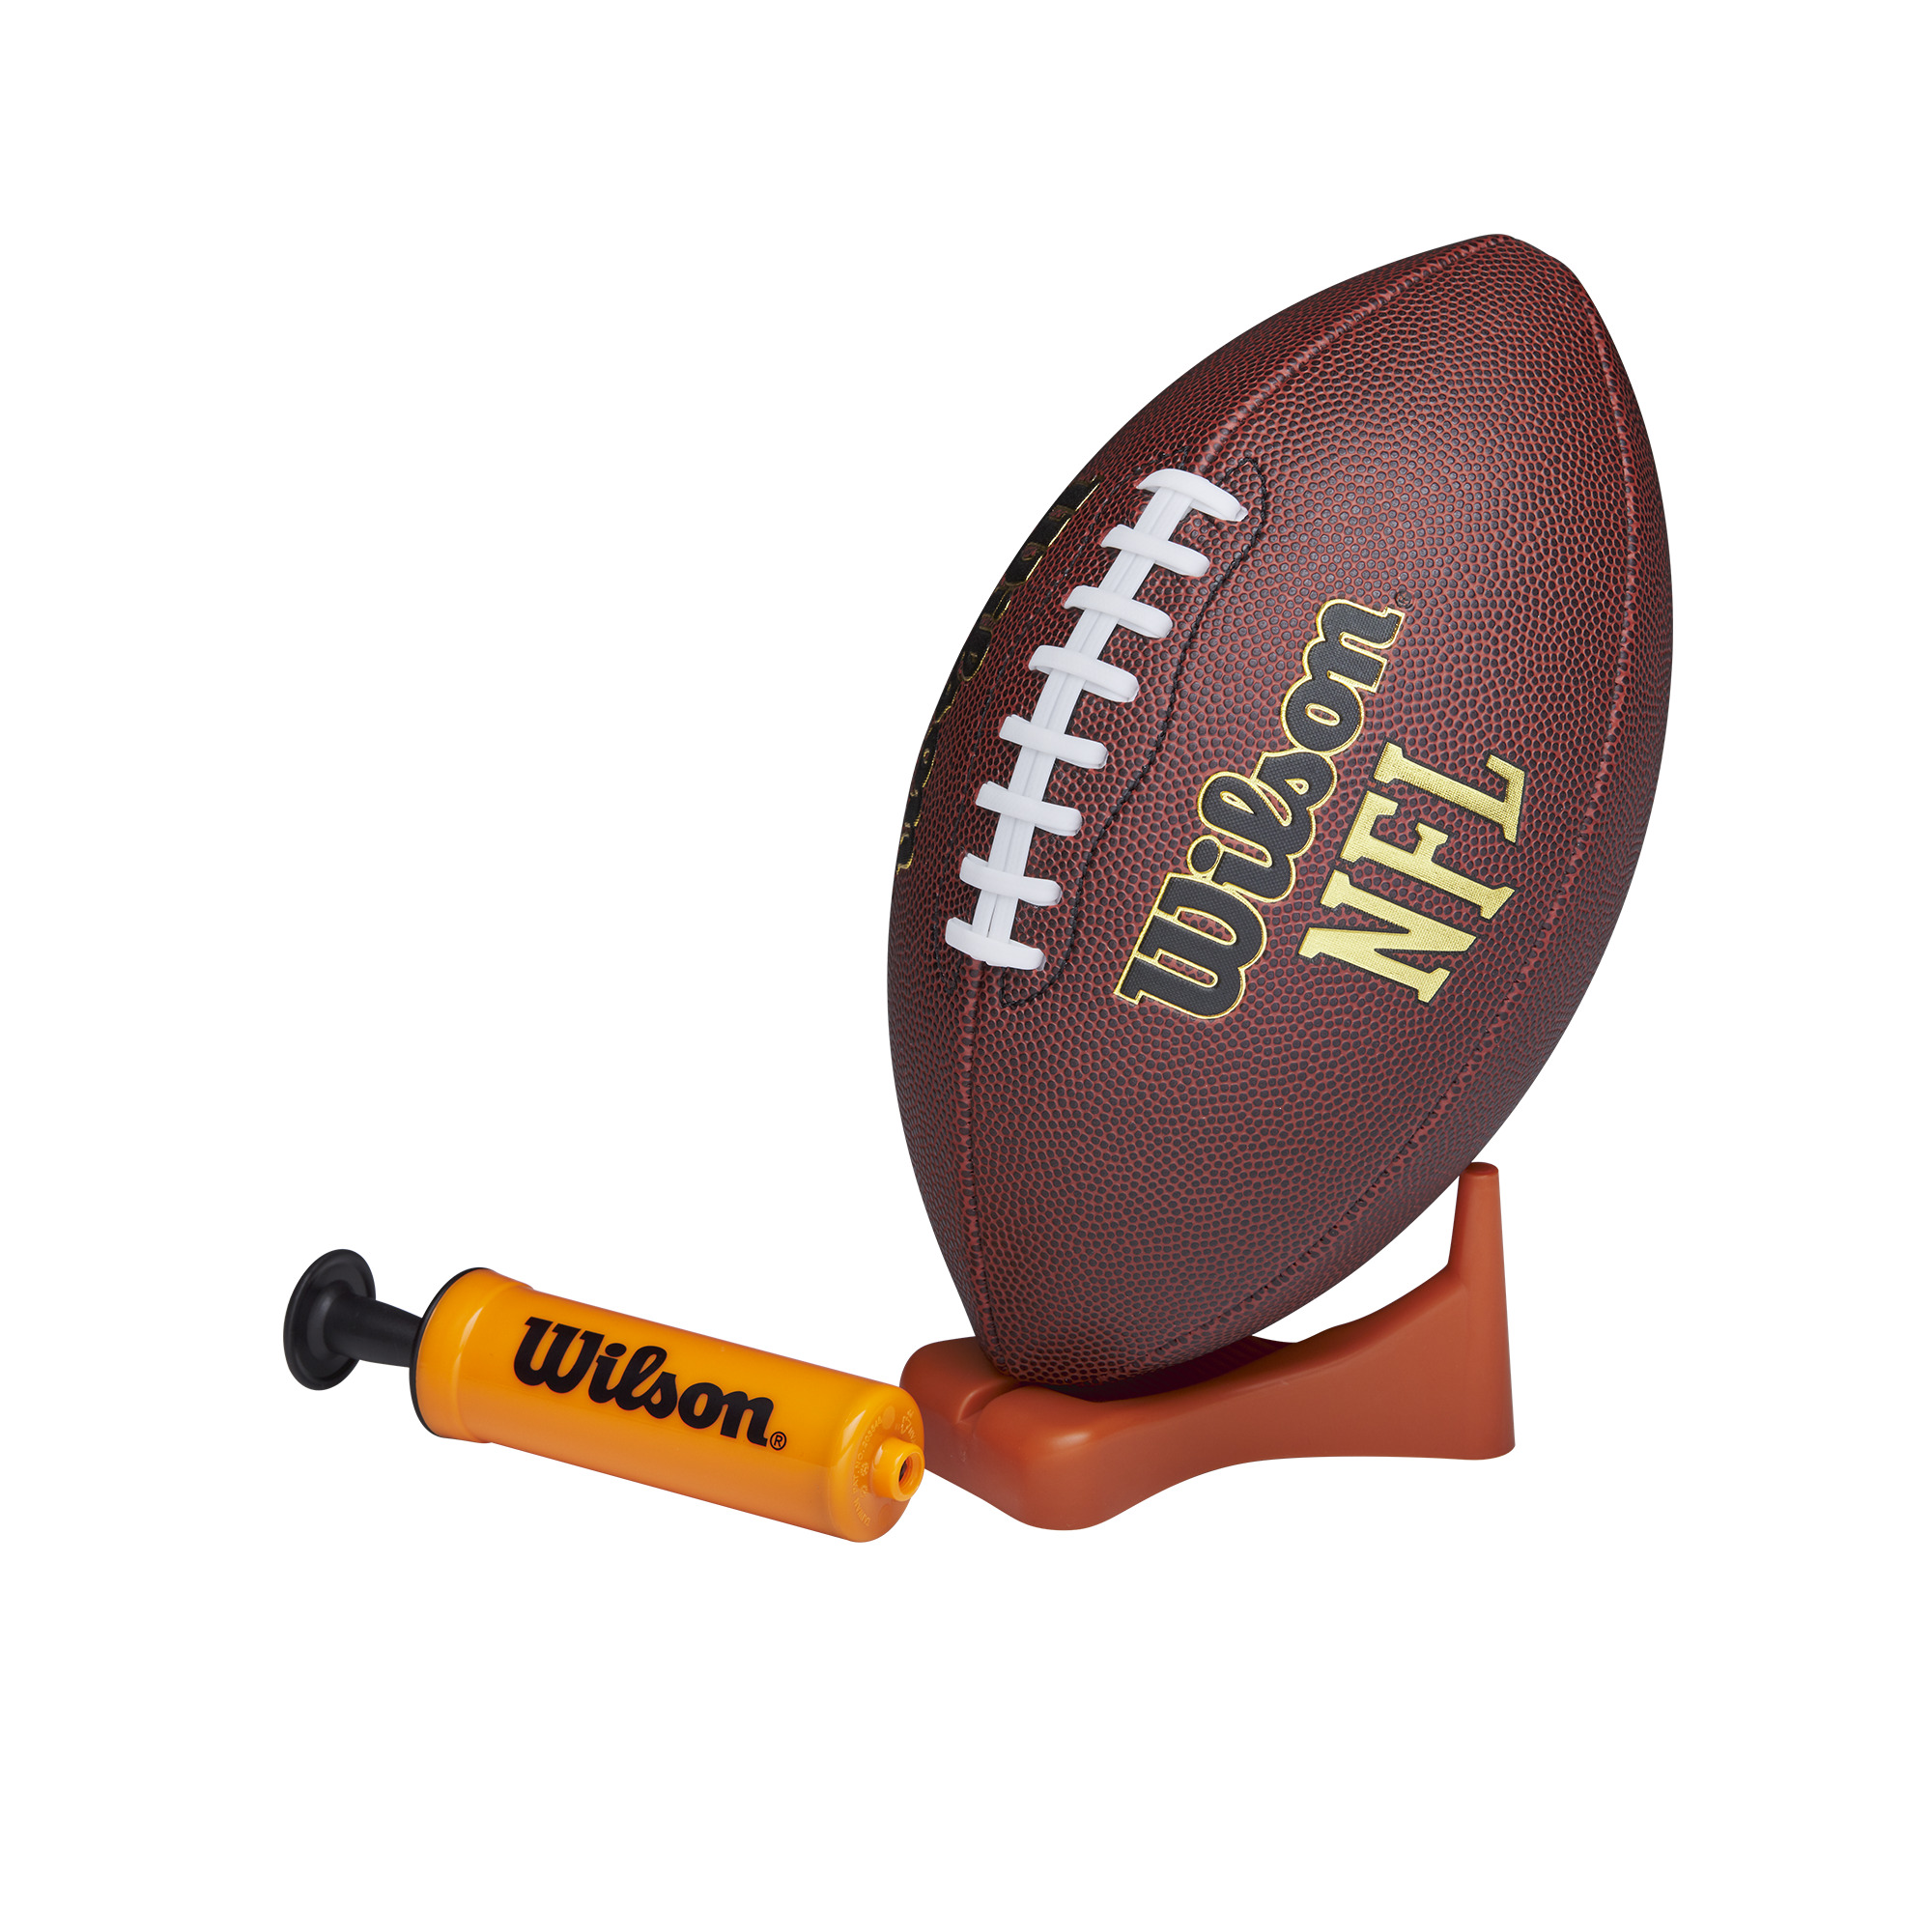 Wilson NFL Composite Leather Junior Football with Pump and Tee